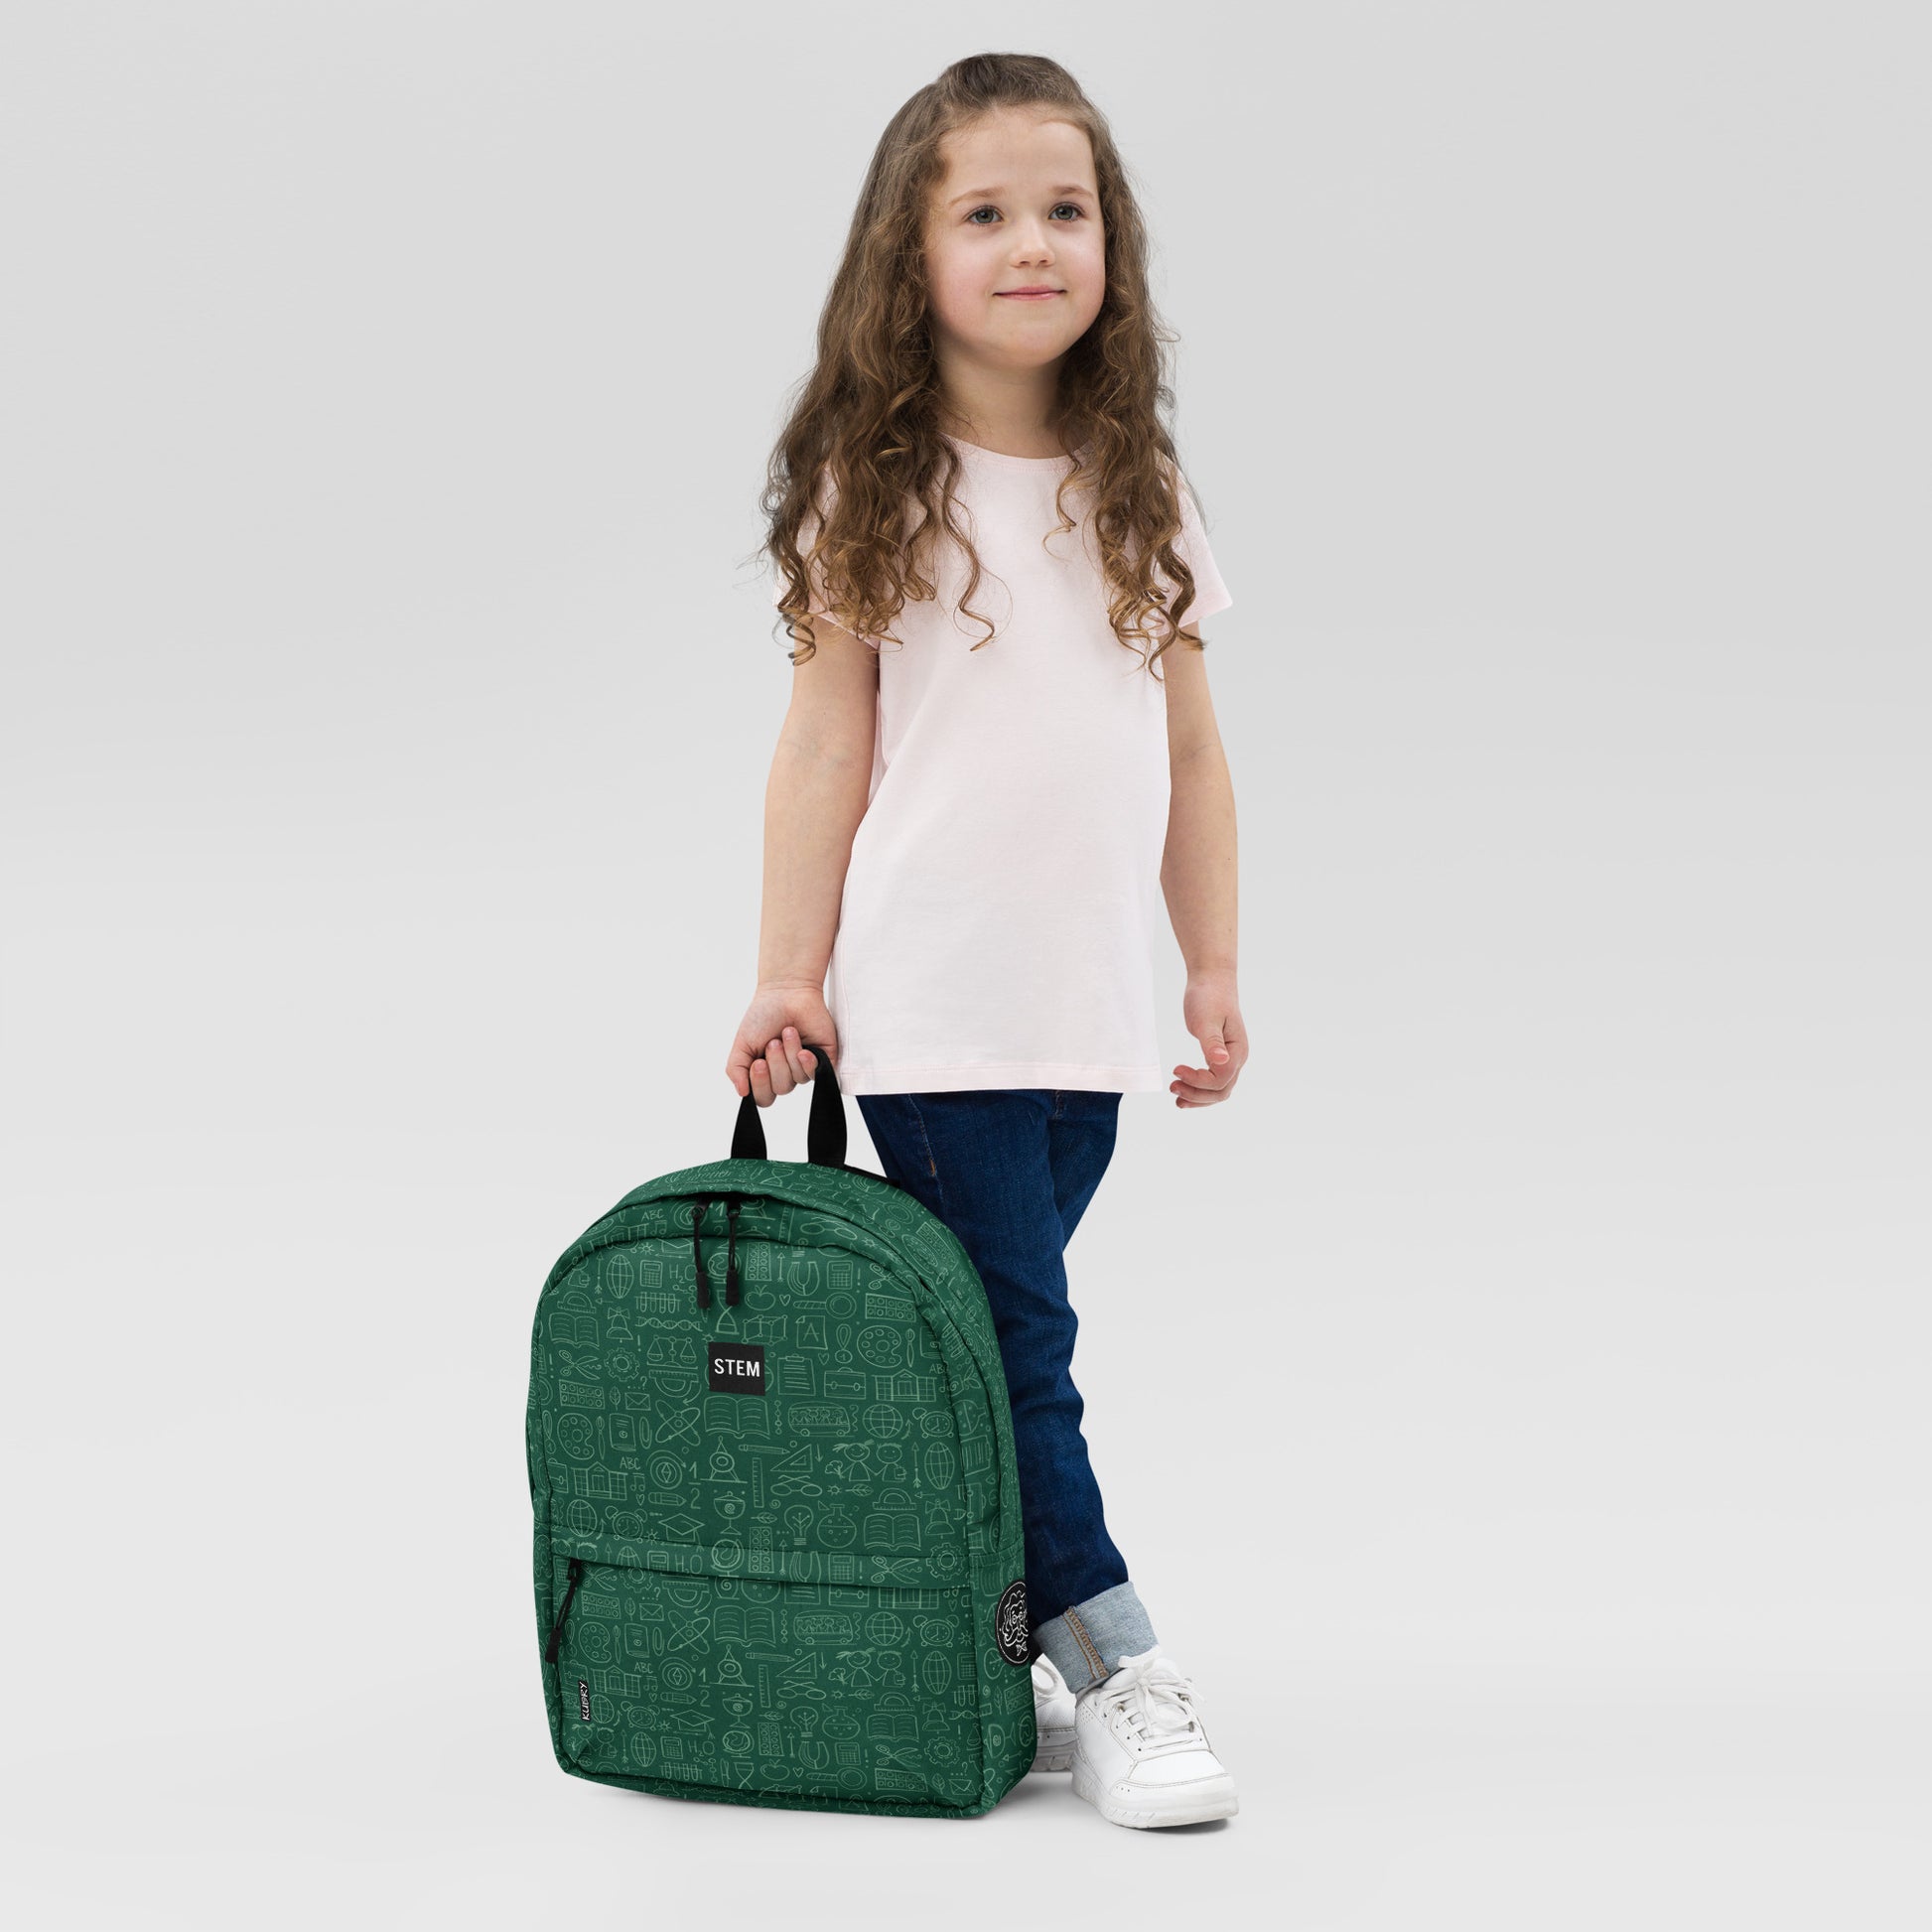 Curly Girl with Personalised School Backpack dark green color,  STEM-themed, stylish designer print